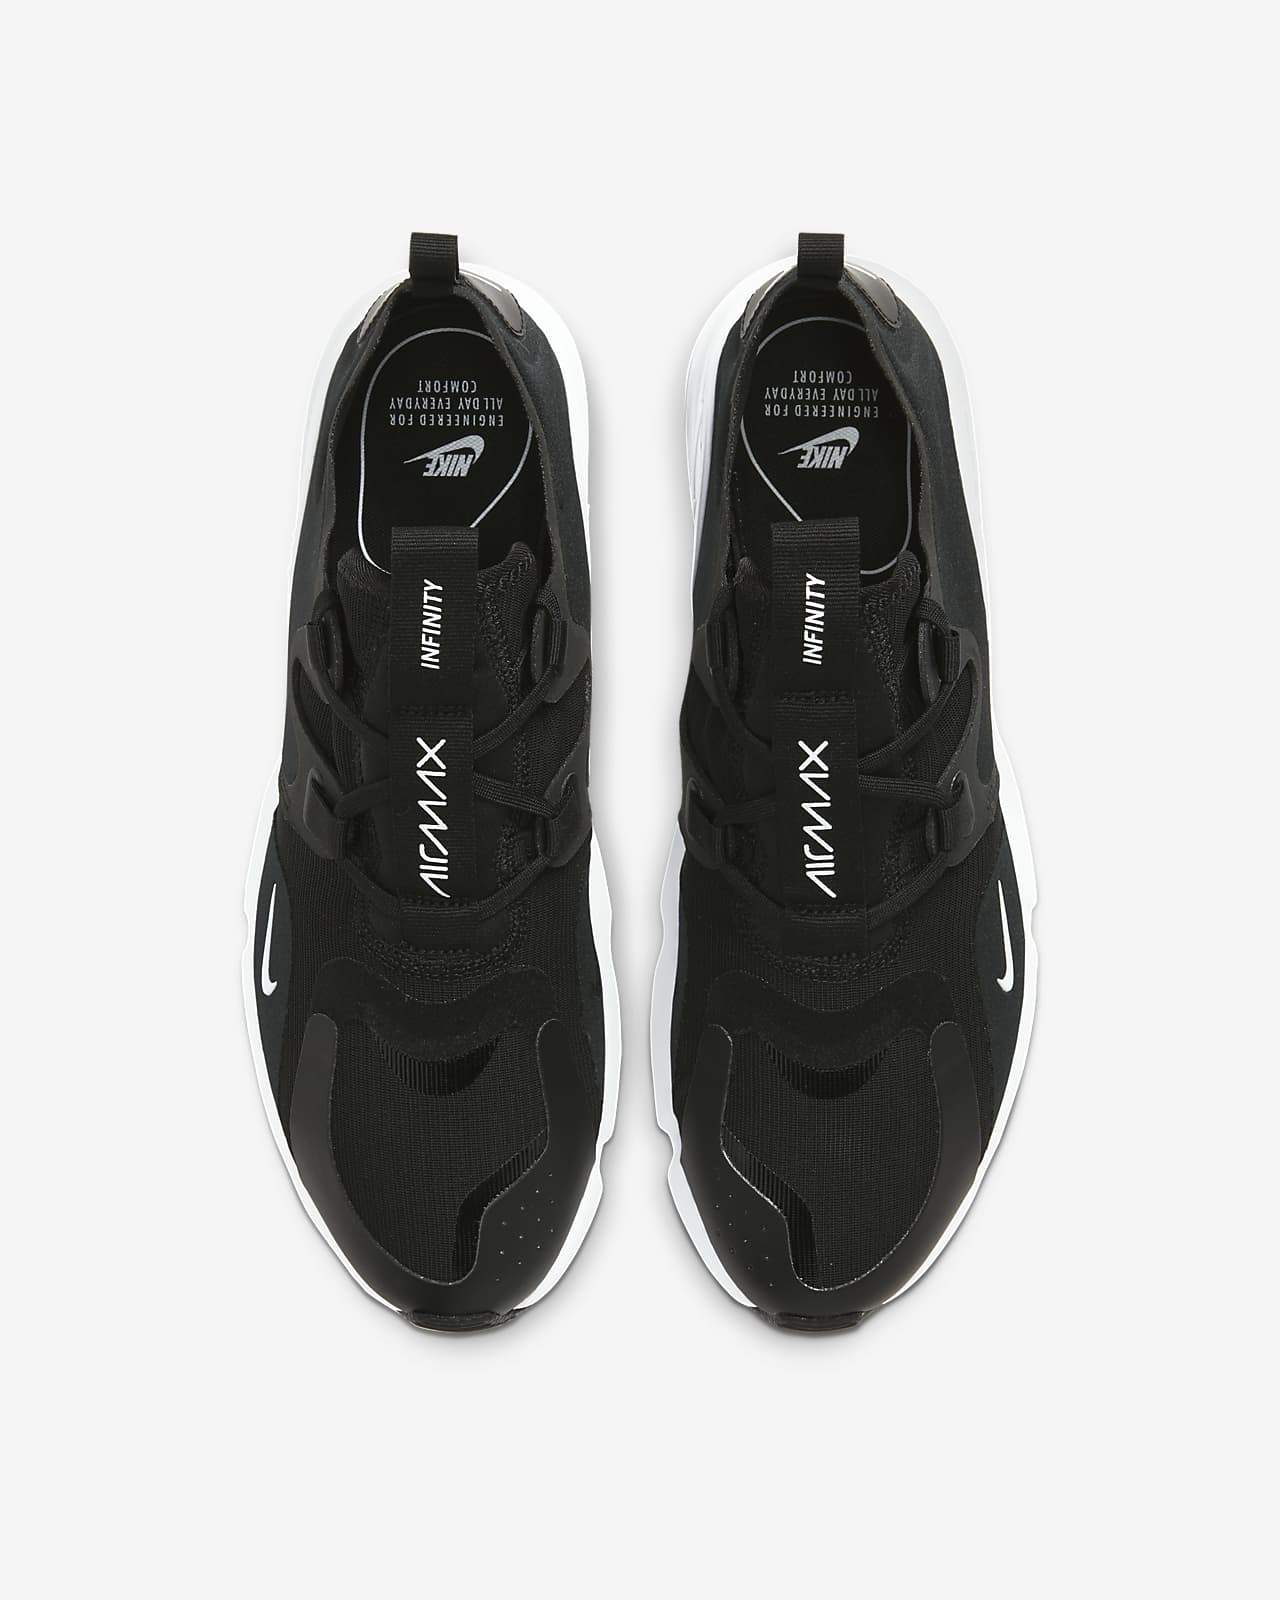 air max infinity release date